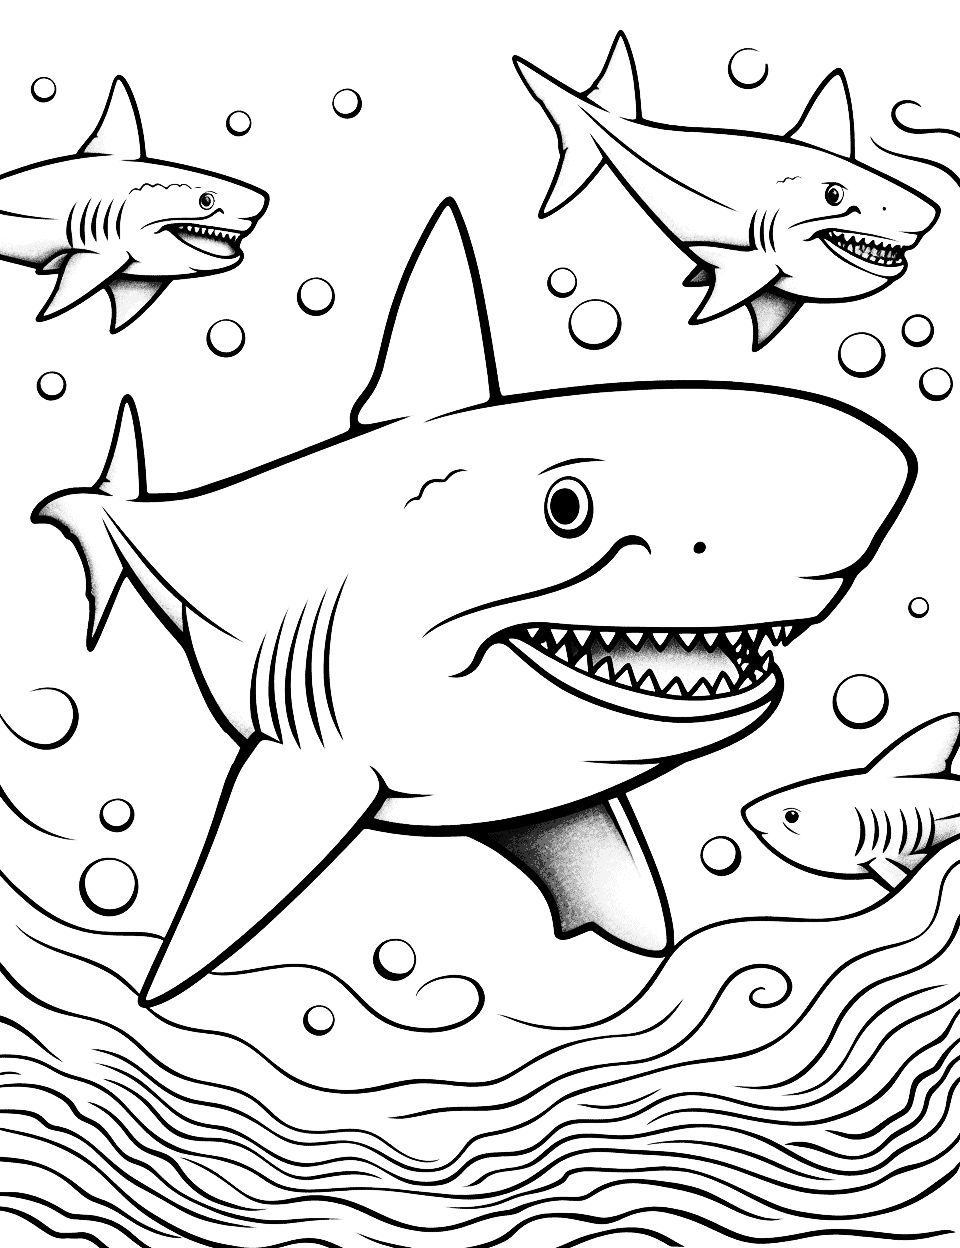 Colorful Shark Pattern Coloring Page - A complex pattern of sharks to be colored with bright and bold shades.